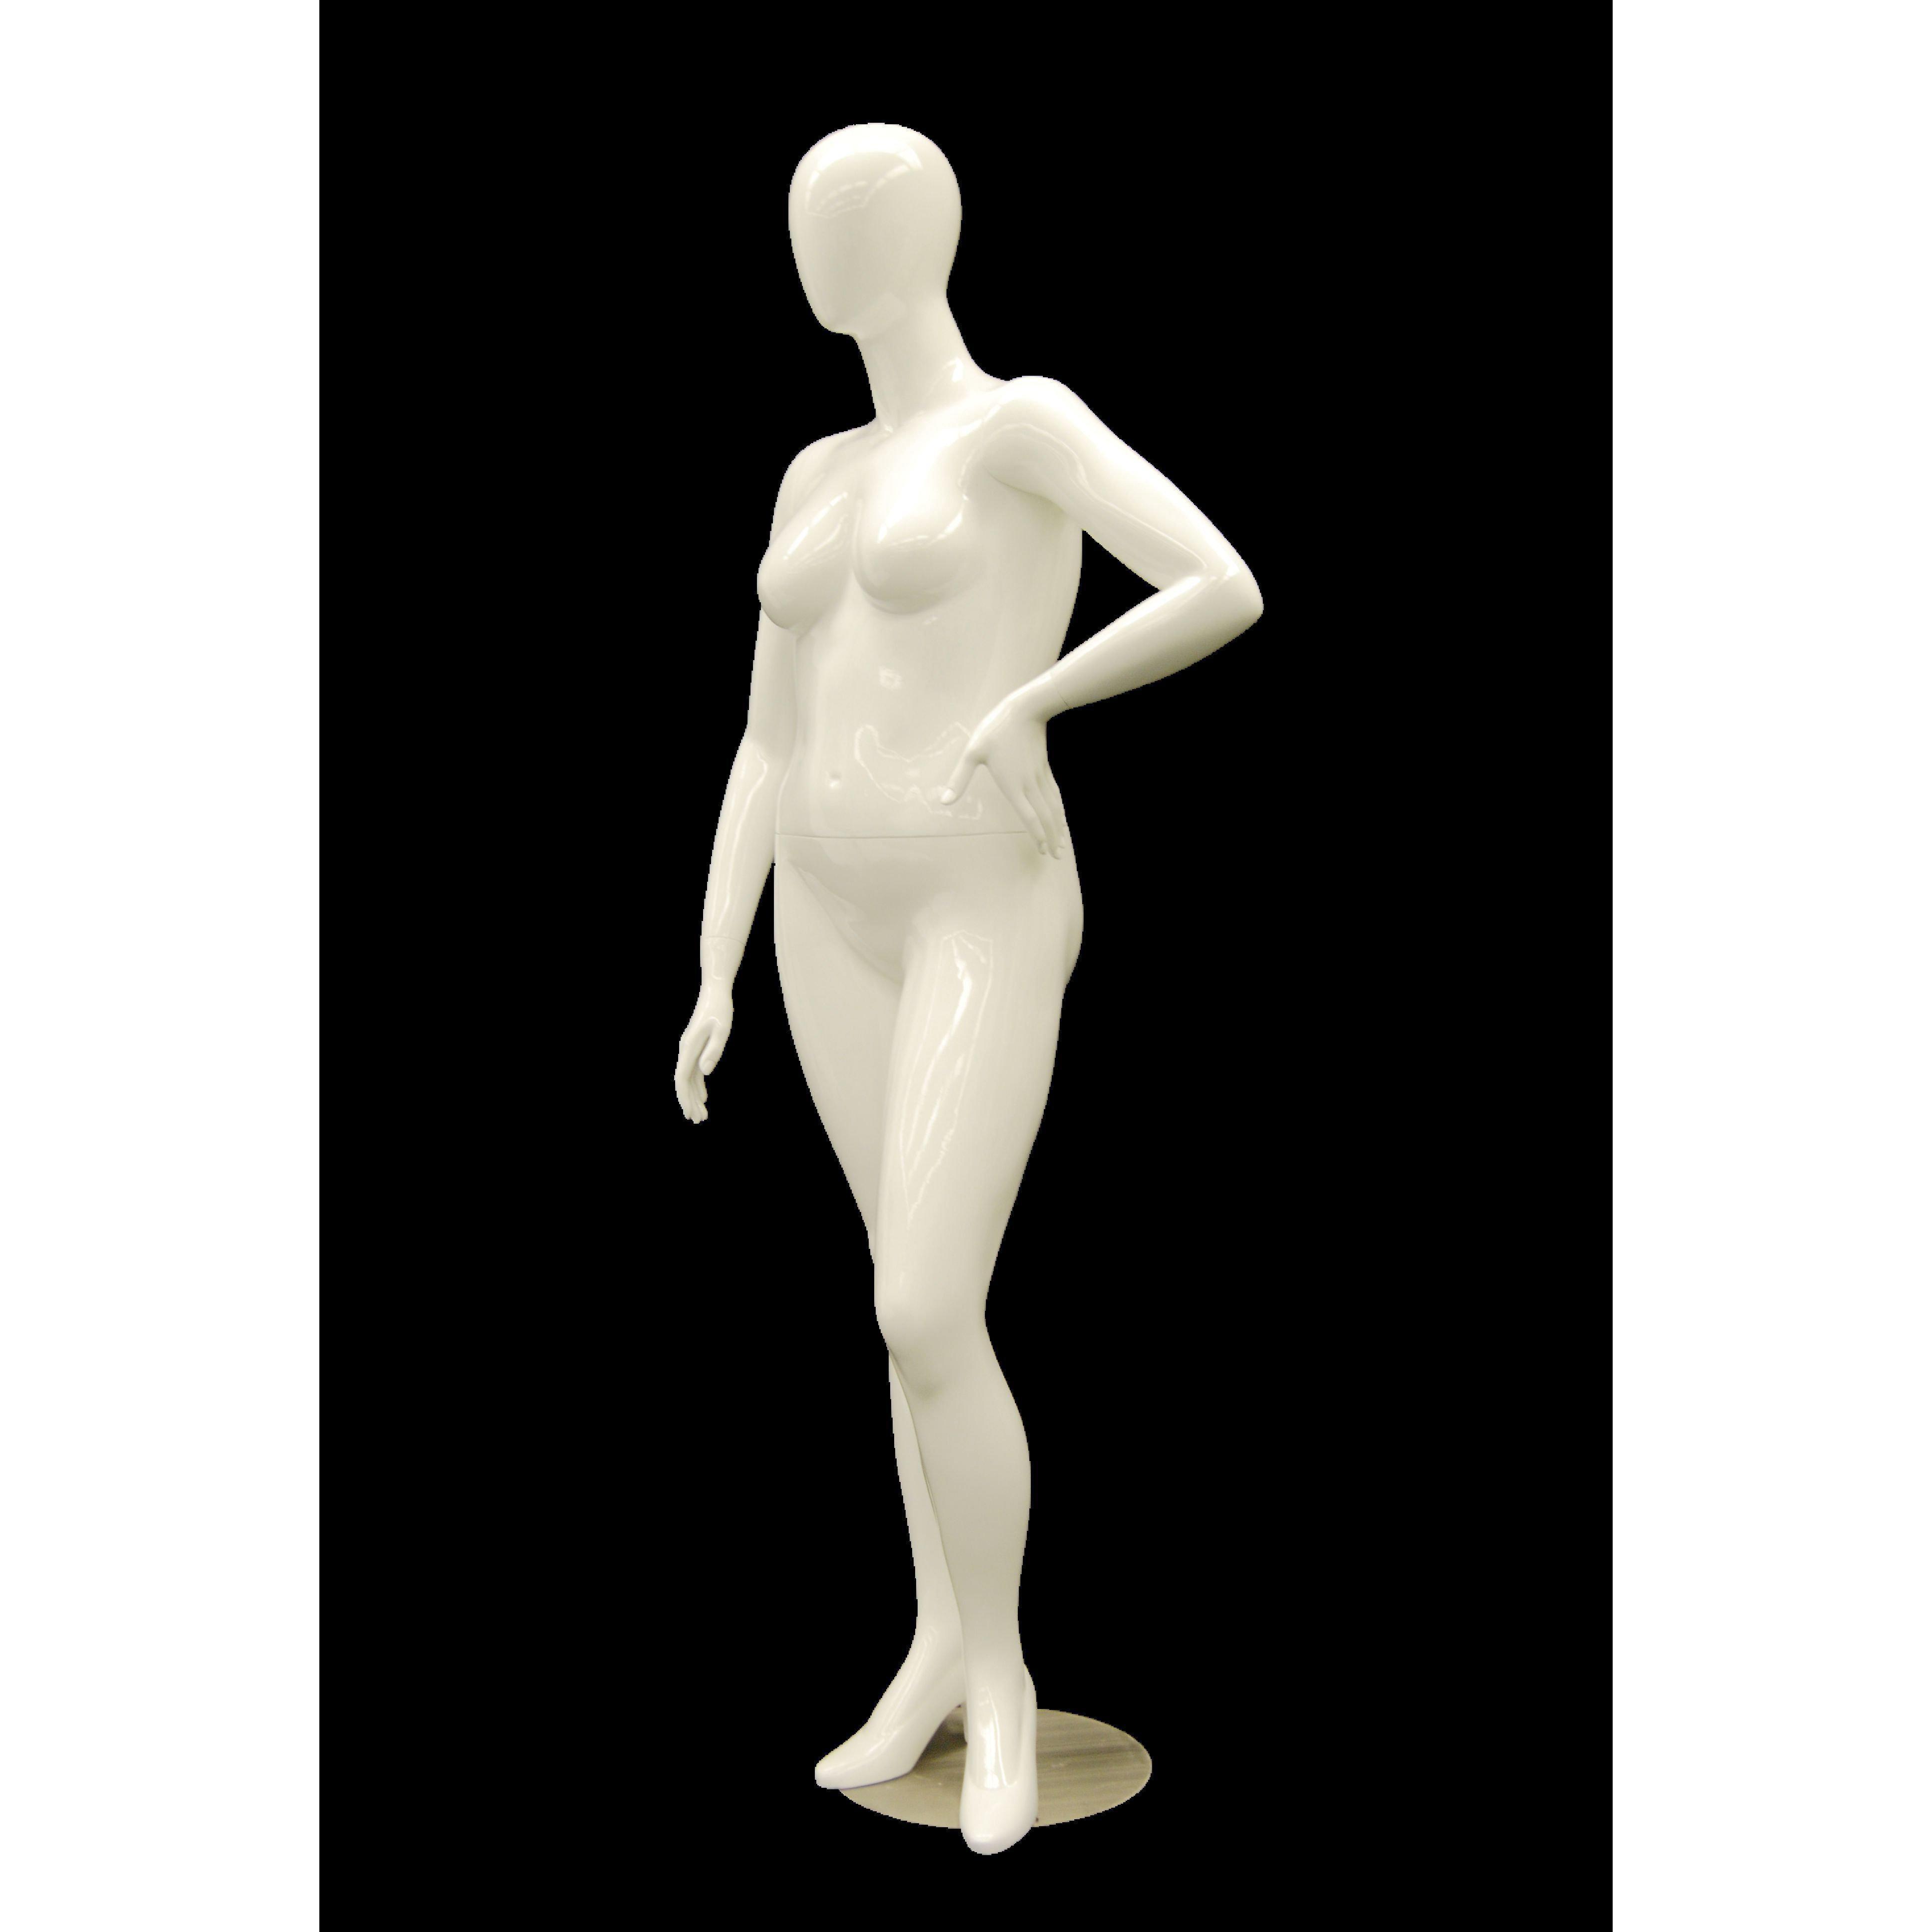 Mannequin Heads - Leading Supplier of High-Quality Models